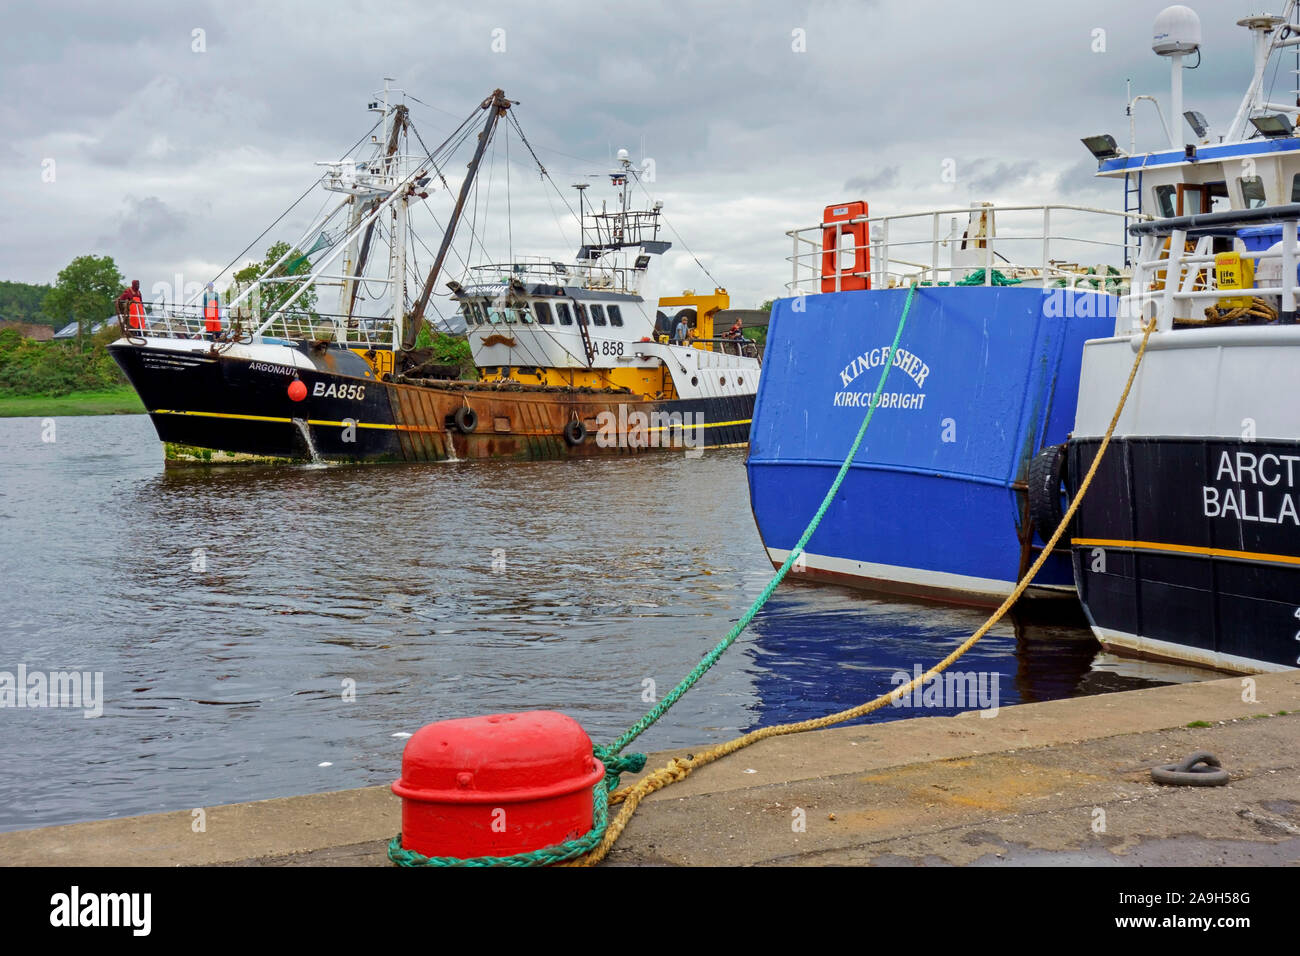 Scallop dredgers at the harbour In Kirkcudbright, Dumfries and Galloway, Scotland. Stock Photo